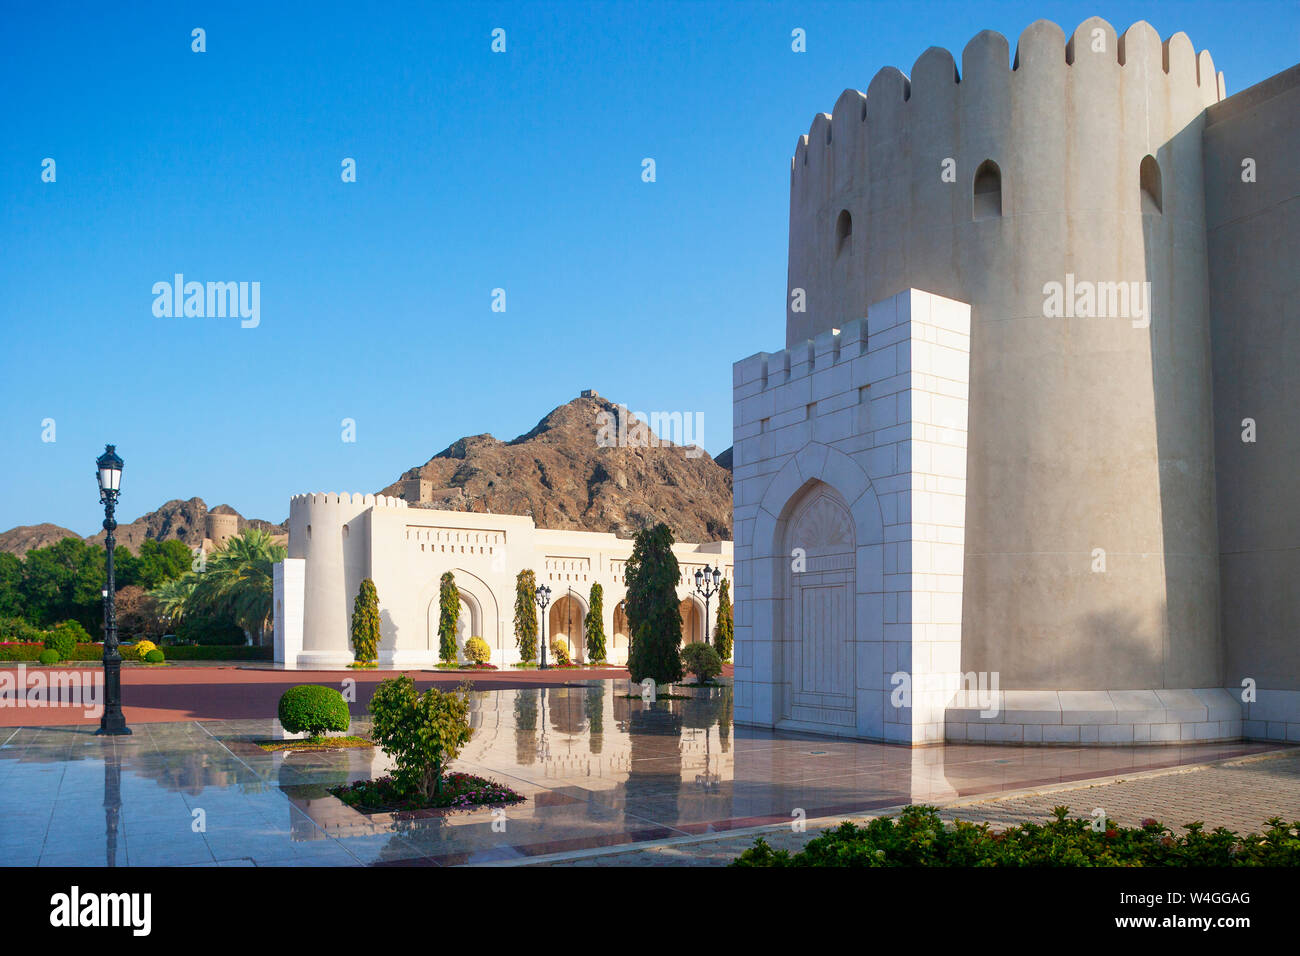 Al Alam Palace, government district, Muscat, Oman Stock Photo